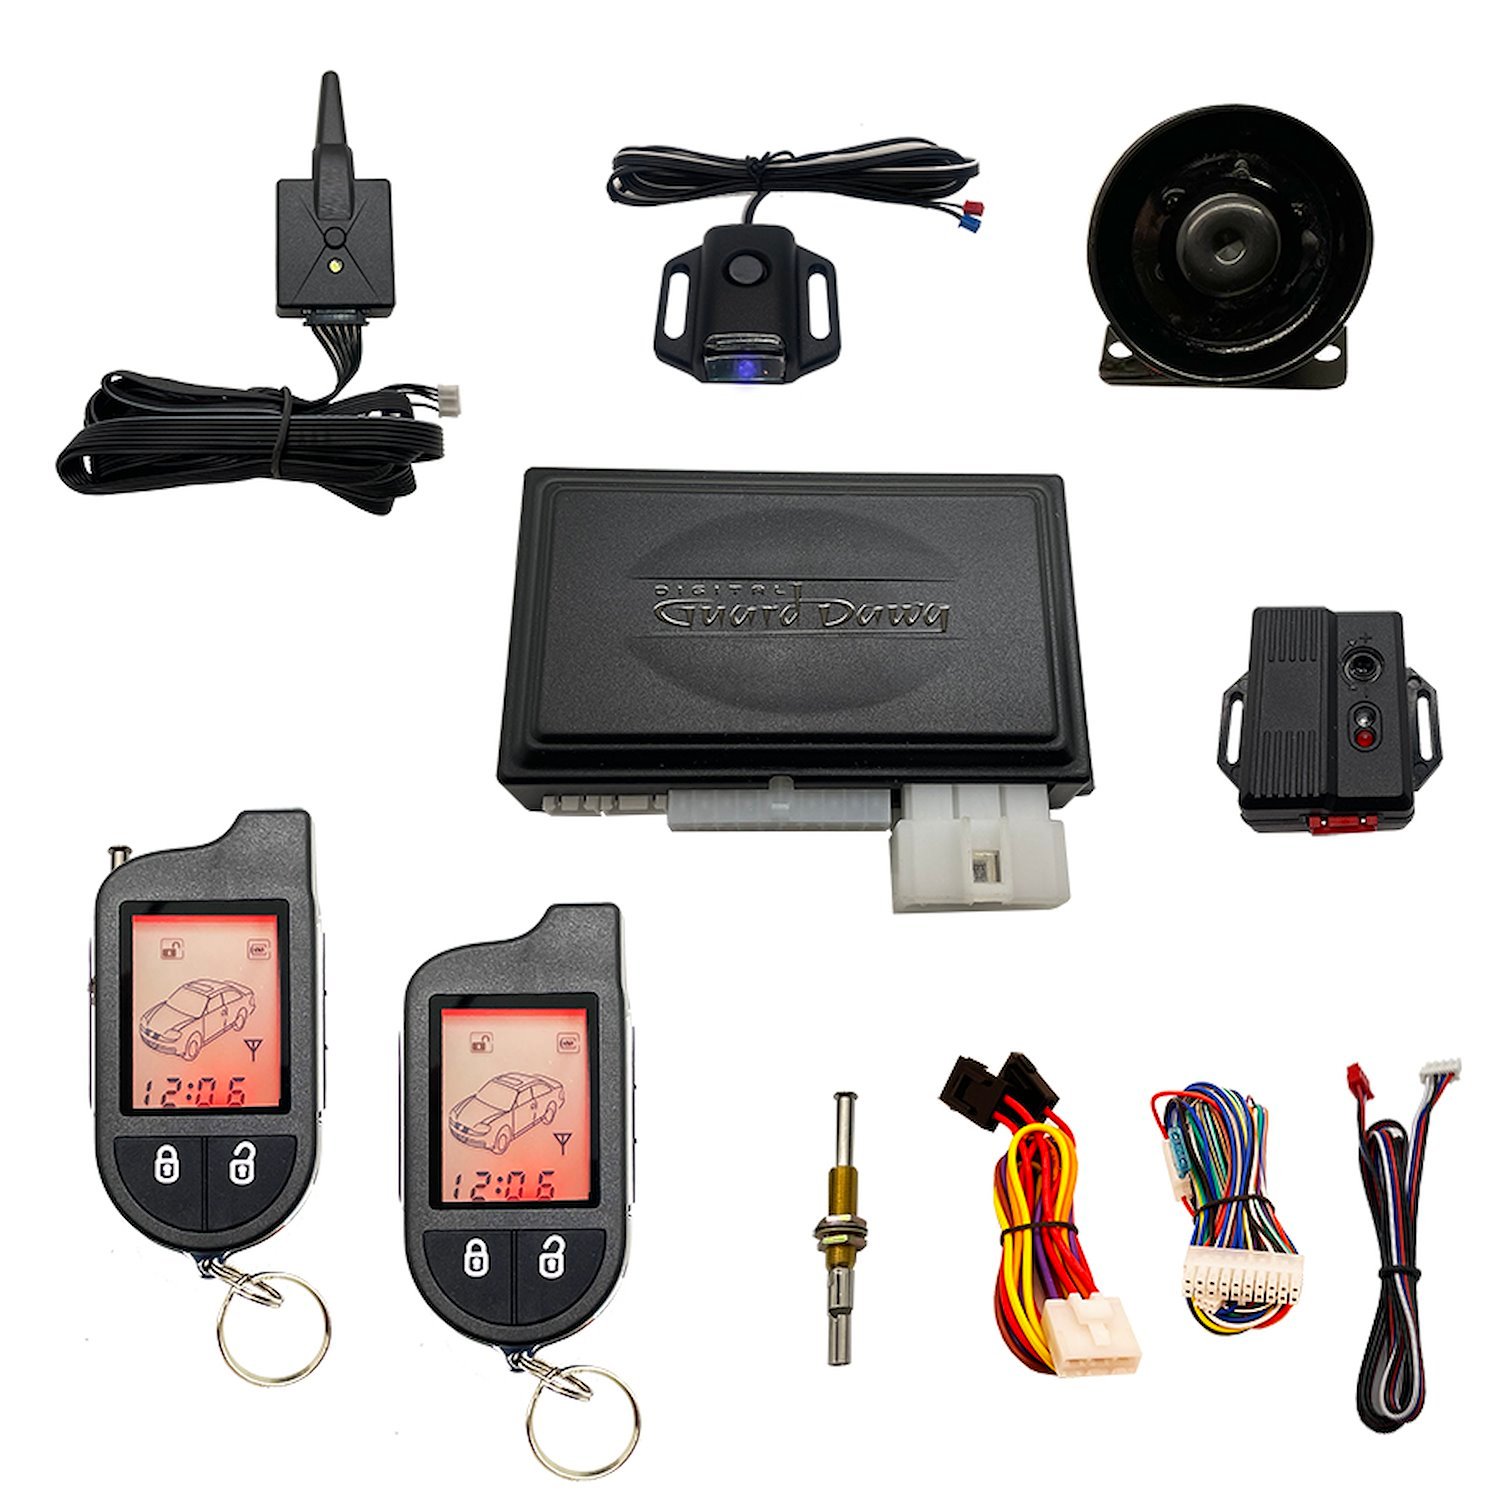 DGD-KY-ALM-RS2 Keyless Entry, Alarm System, and Remote Start, 2-Way